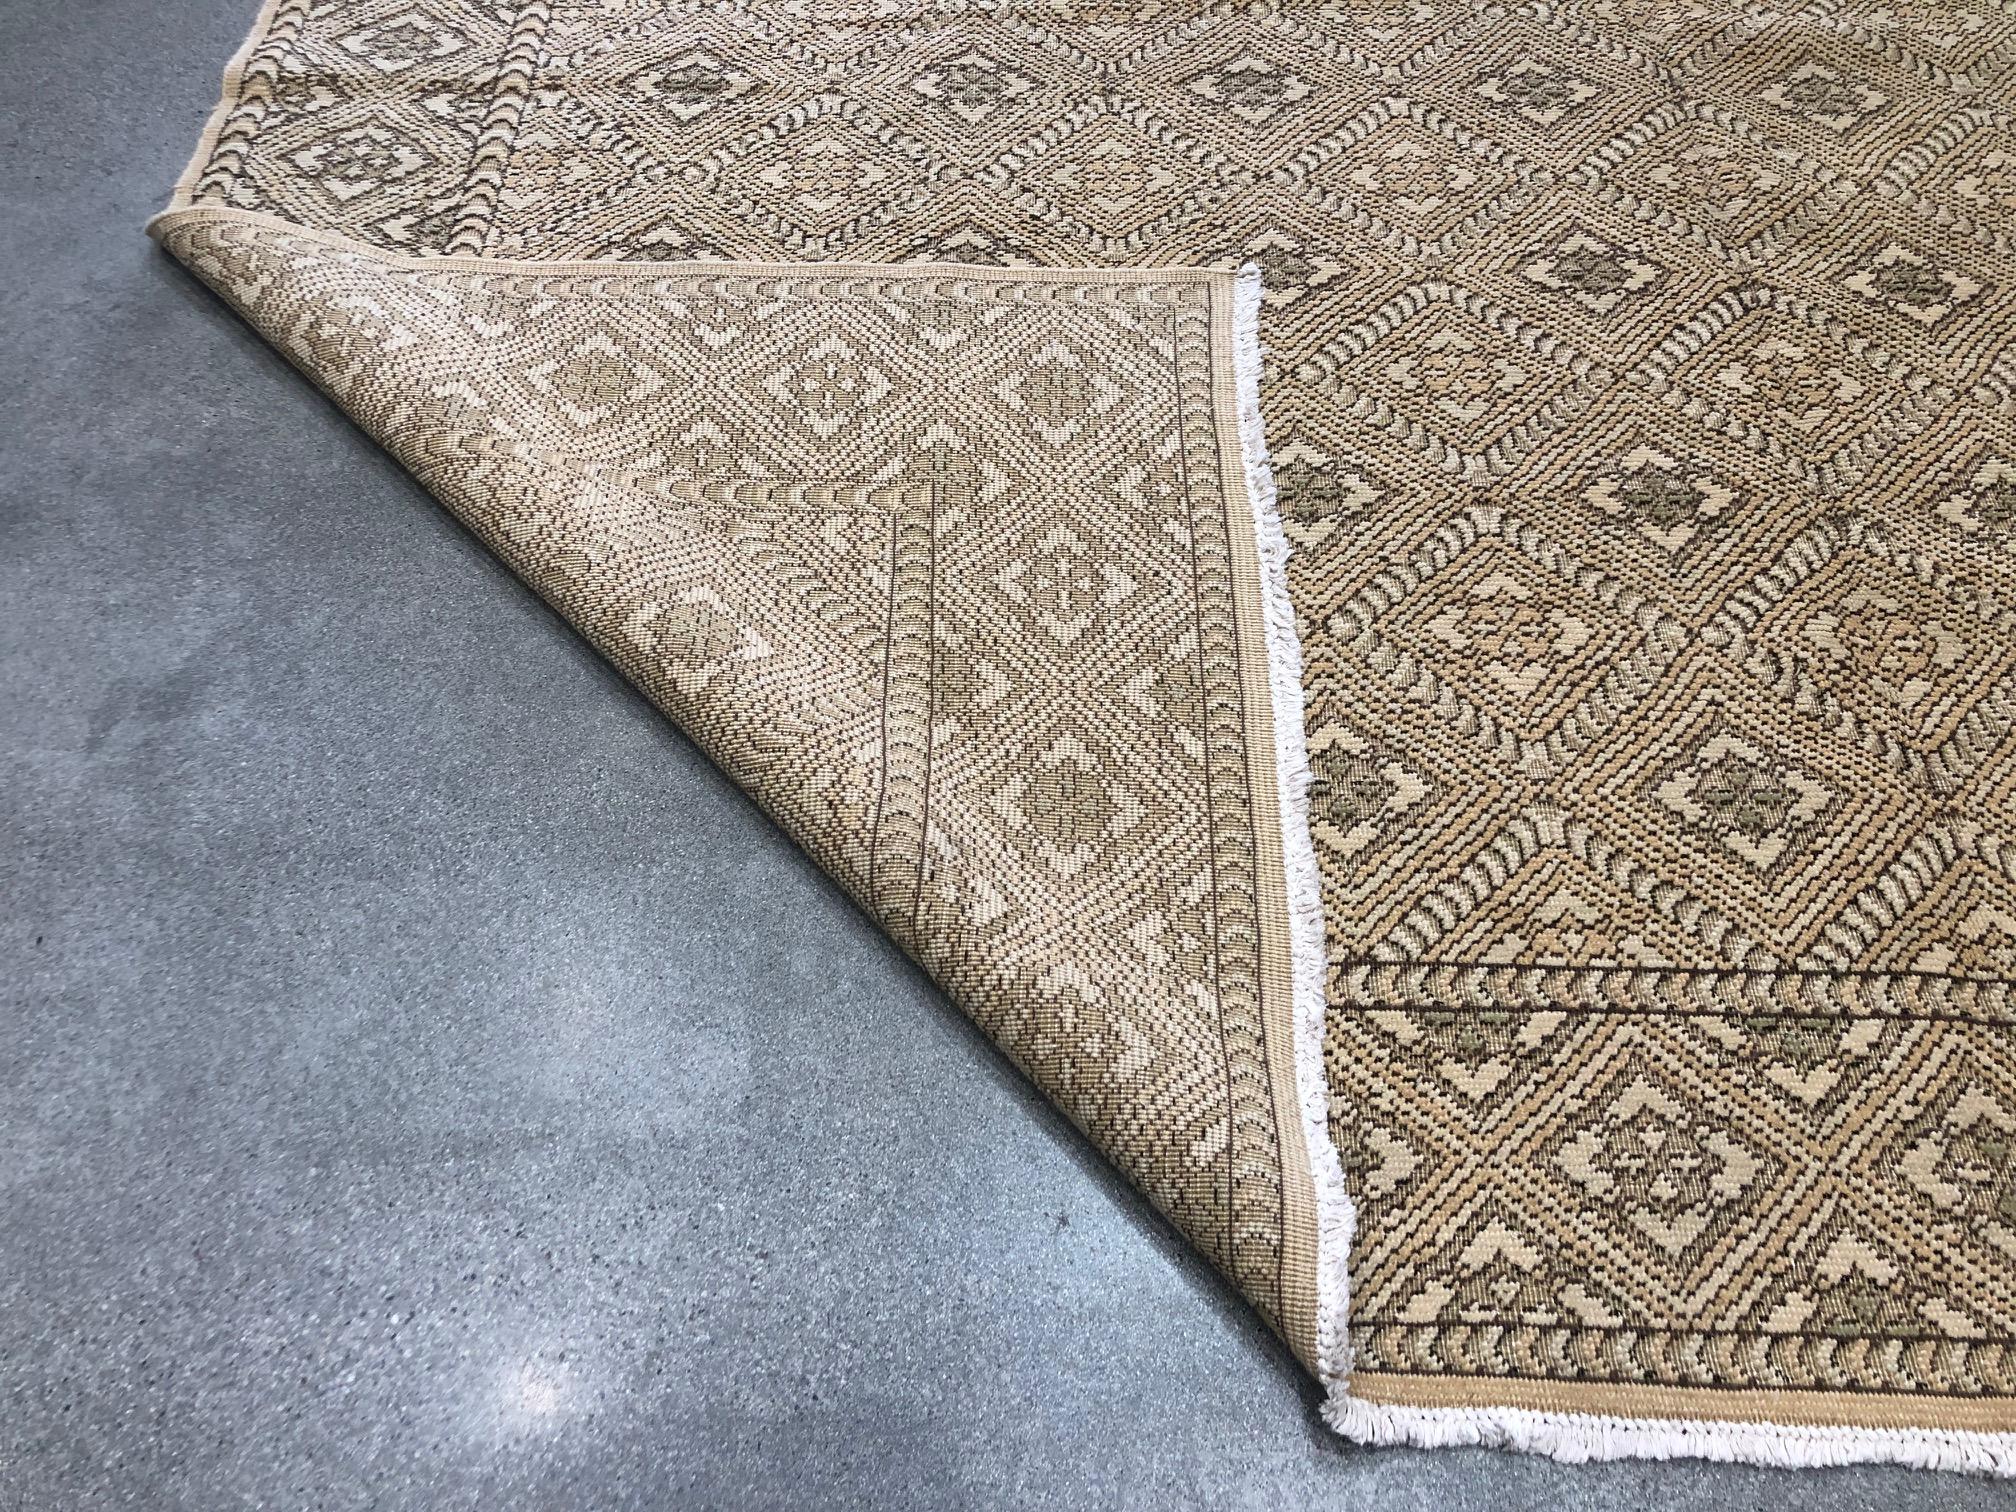 Texture abounds in this stunning wool rug with the look and feel of finely executed needlework. Subtle beige and pastel tones give this rug a versatility advantage that is hard to match. Handmade in Europe.